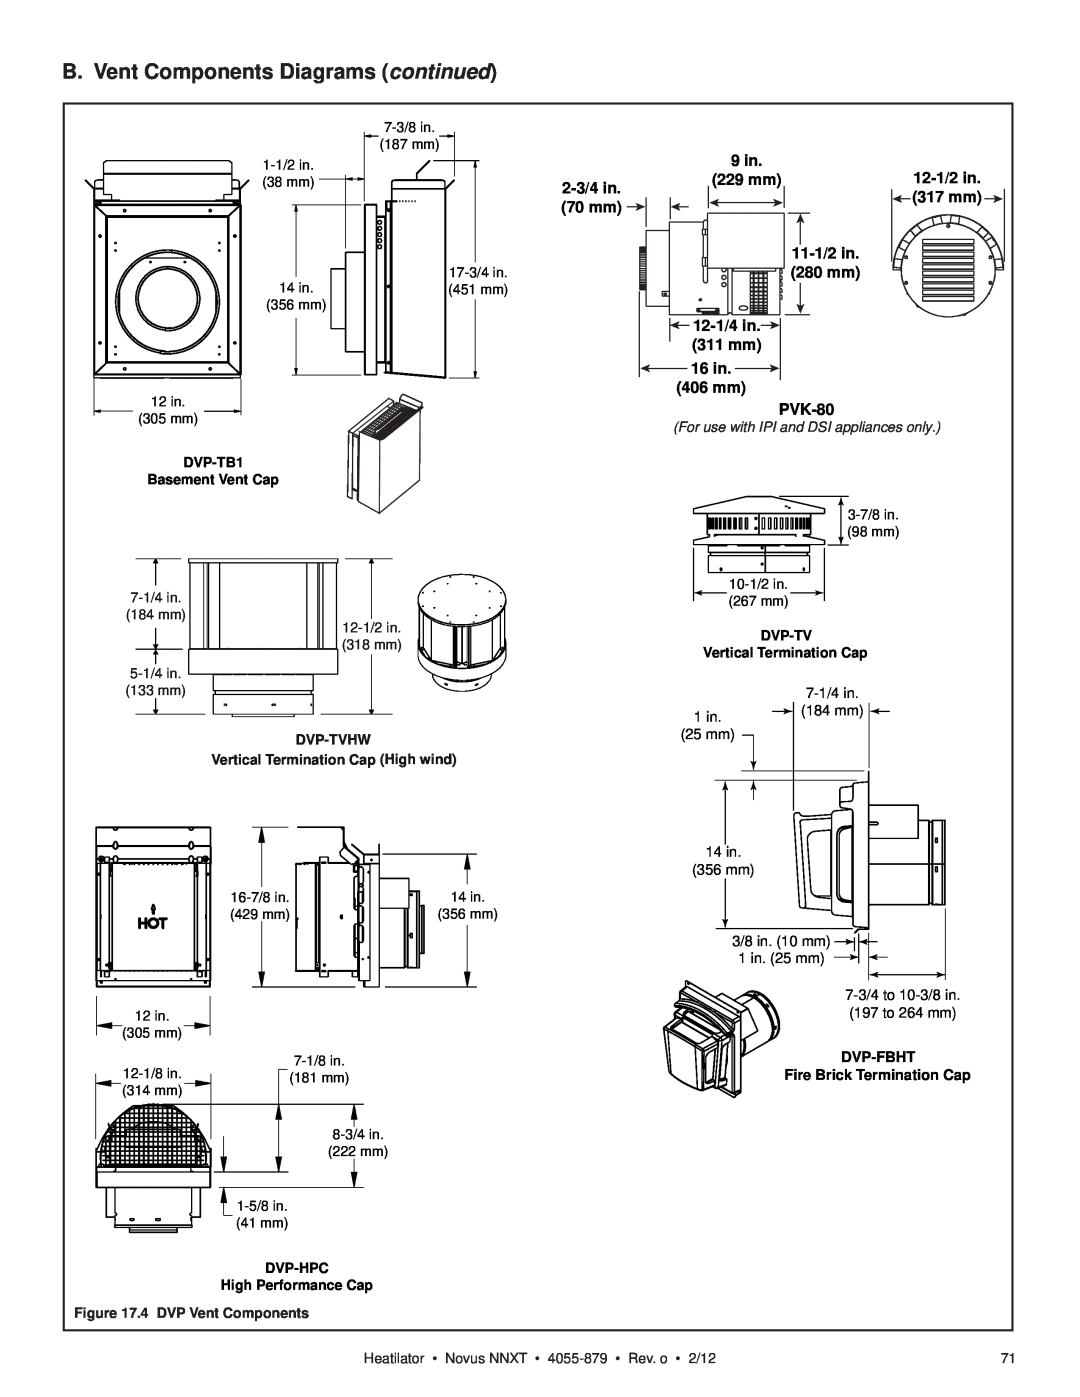 Heatiator NNXT4236I B. Vent Components Diagrams continued, 9 in, 2-3/4 in, 229 mm, 70 mm, 11-1/2 in, 12-1/4 in, 311 mm 